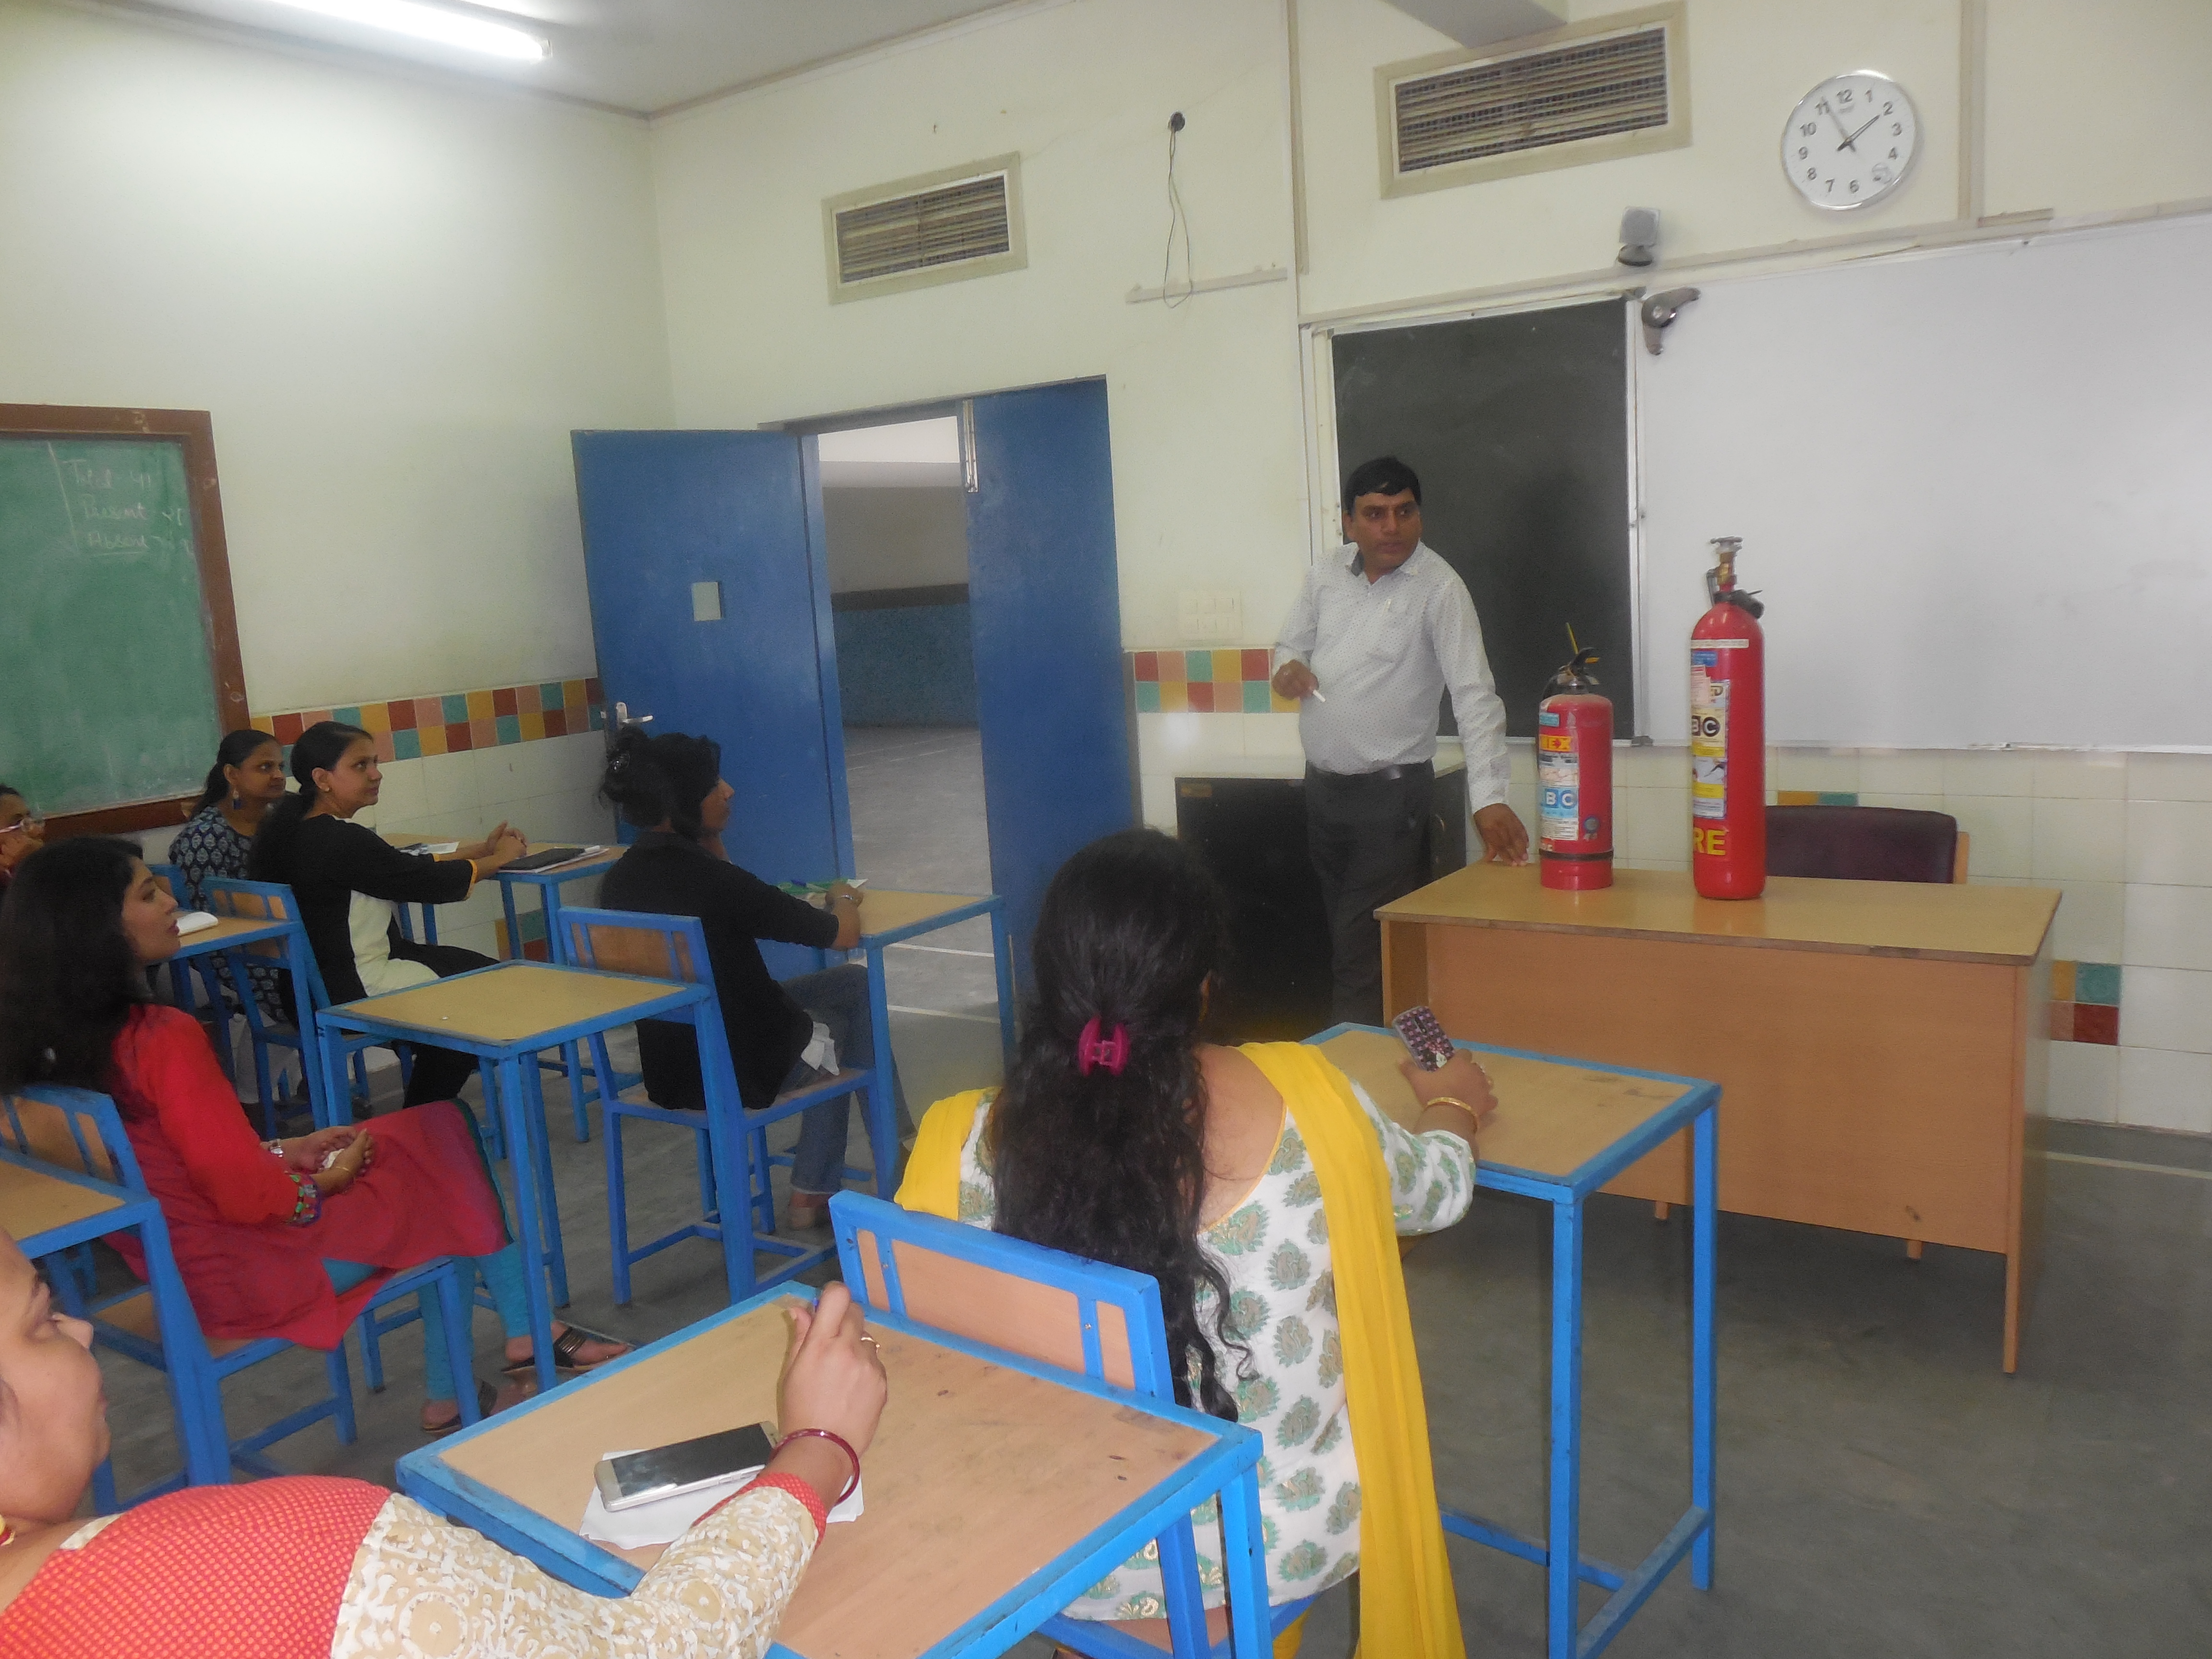 Fire Safety Session